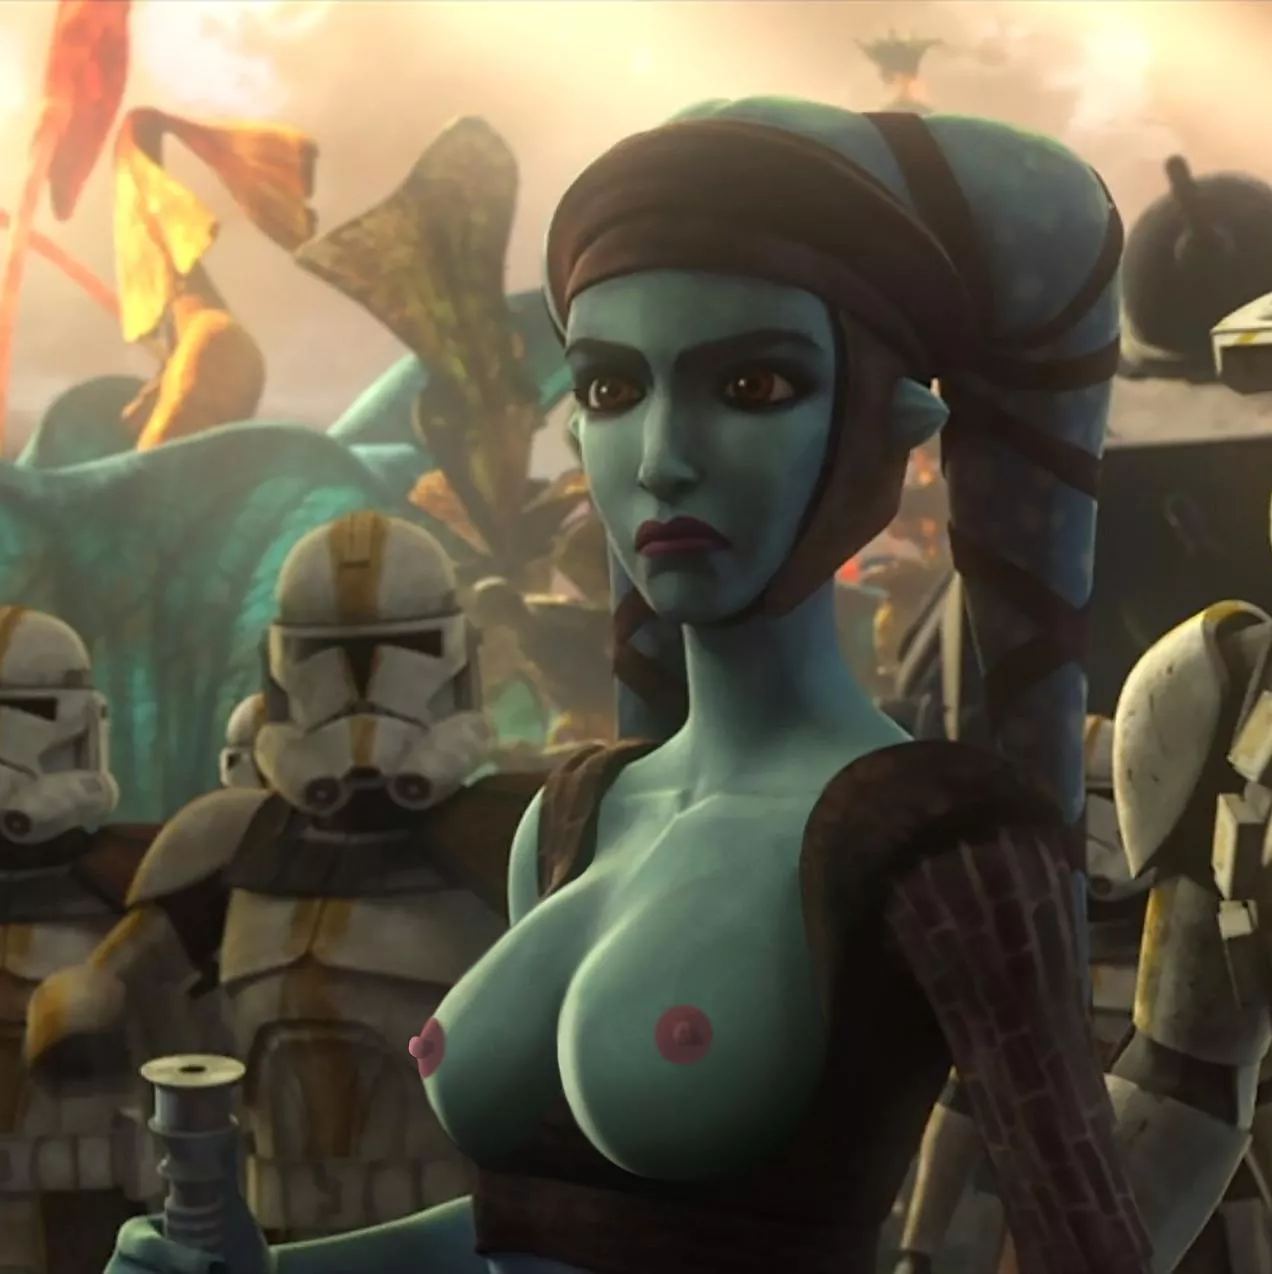 Star Wars The Clone Wars Naked